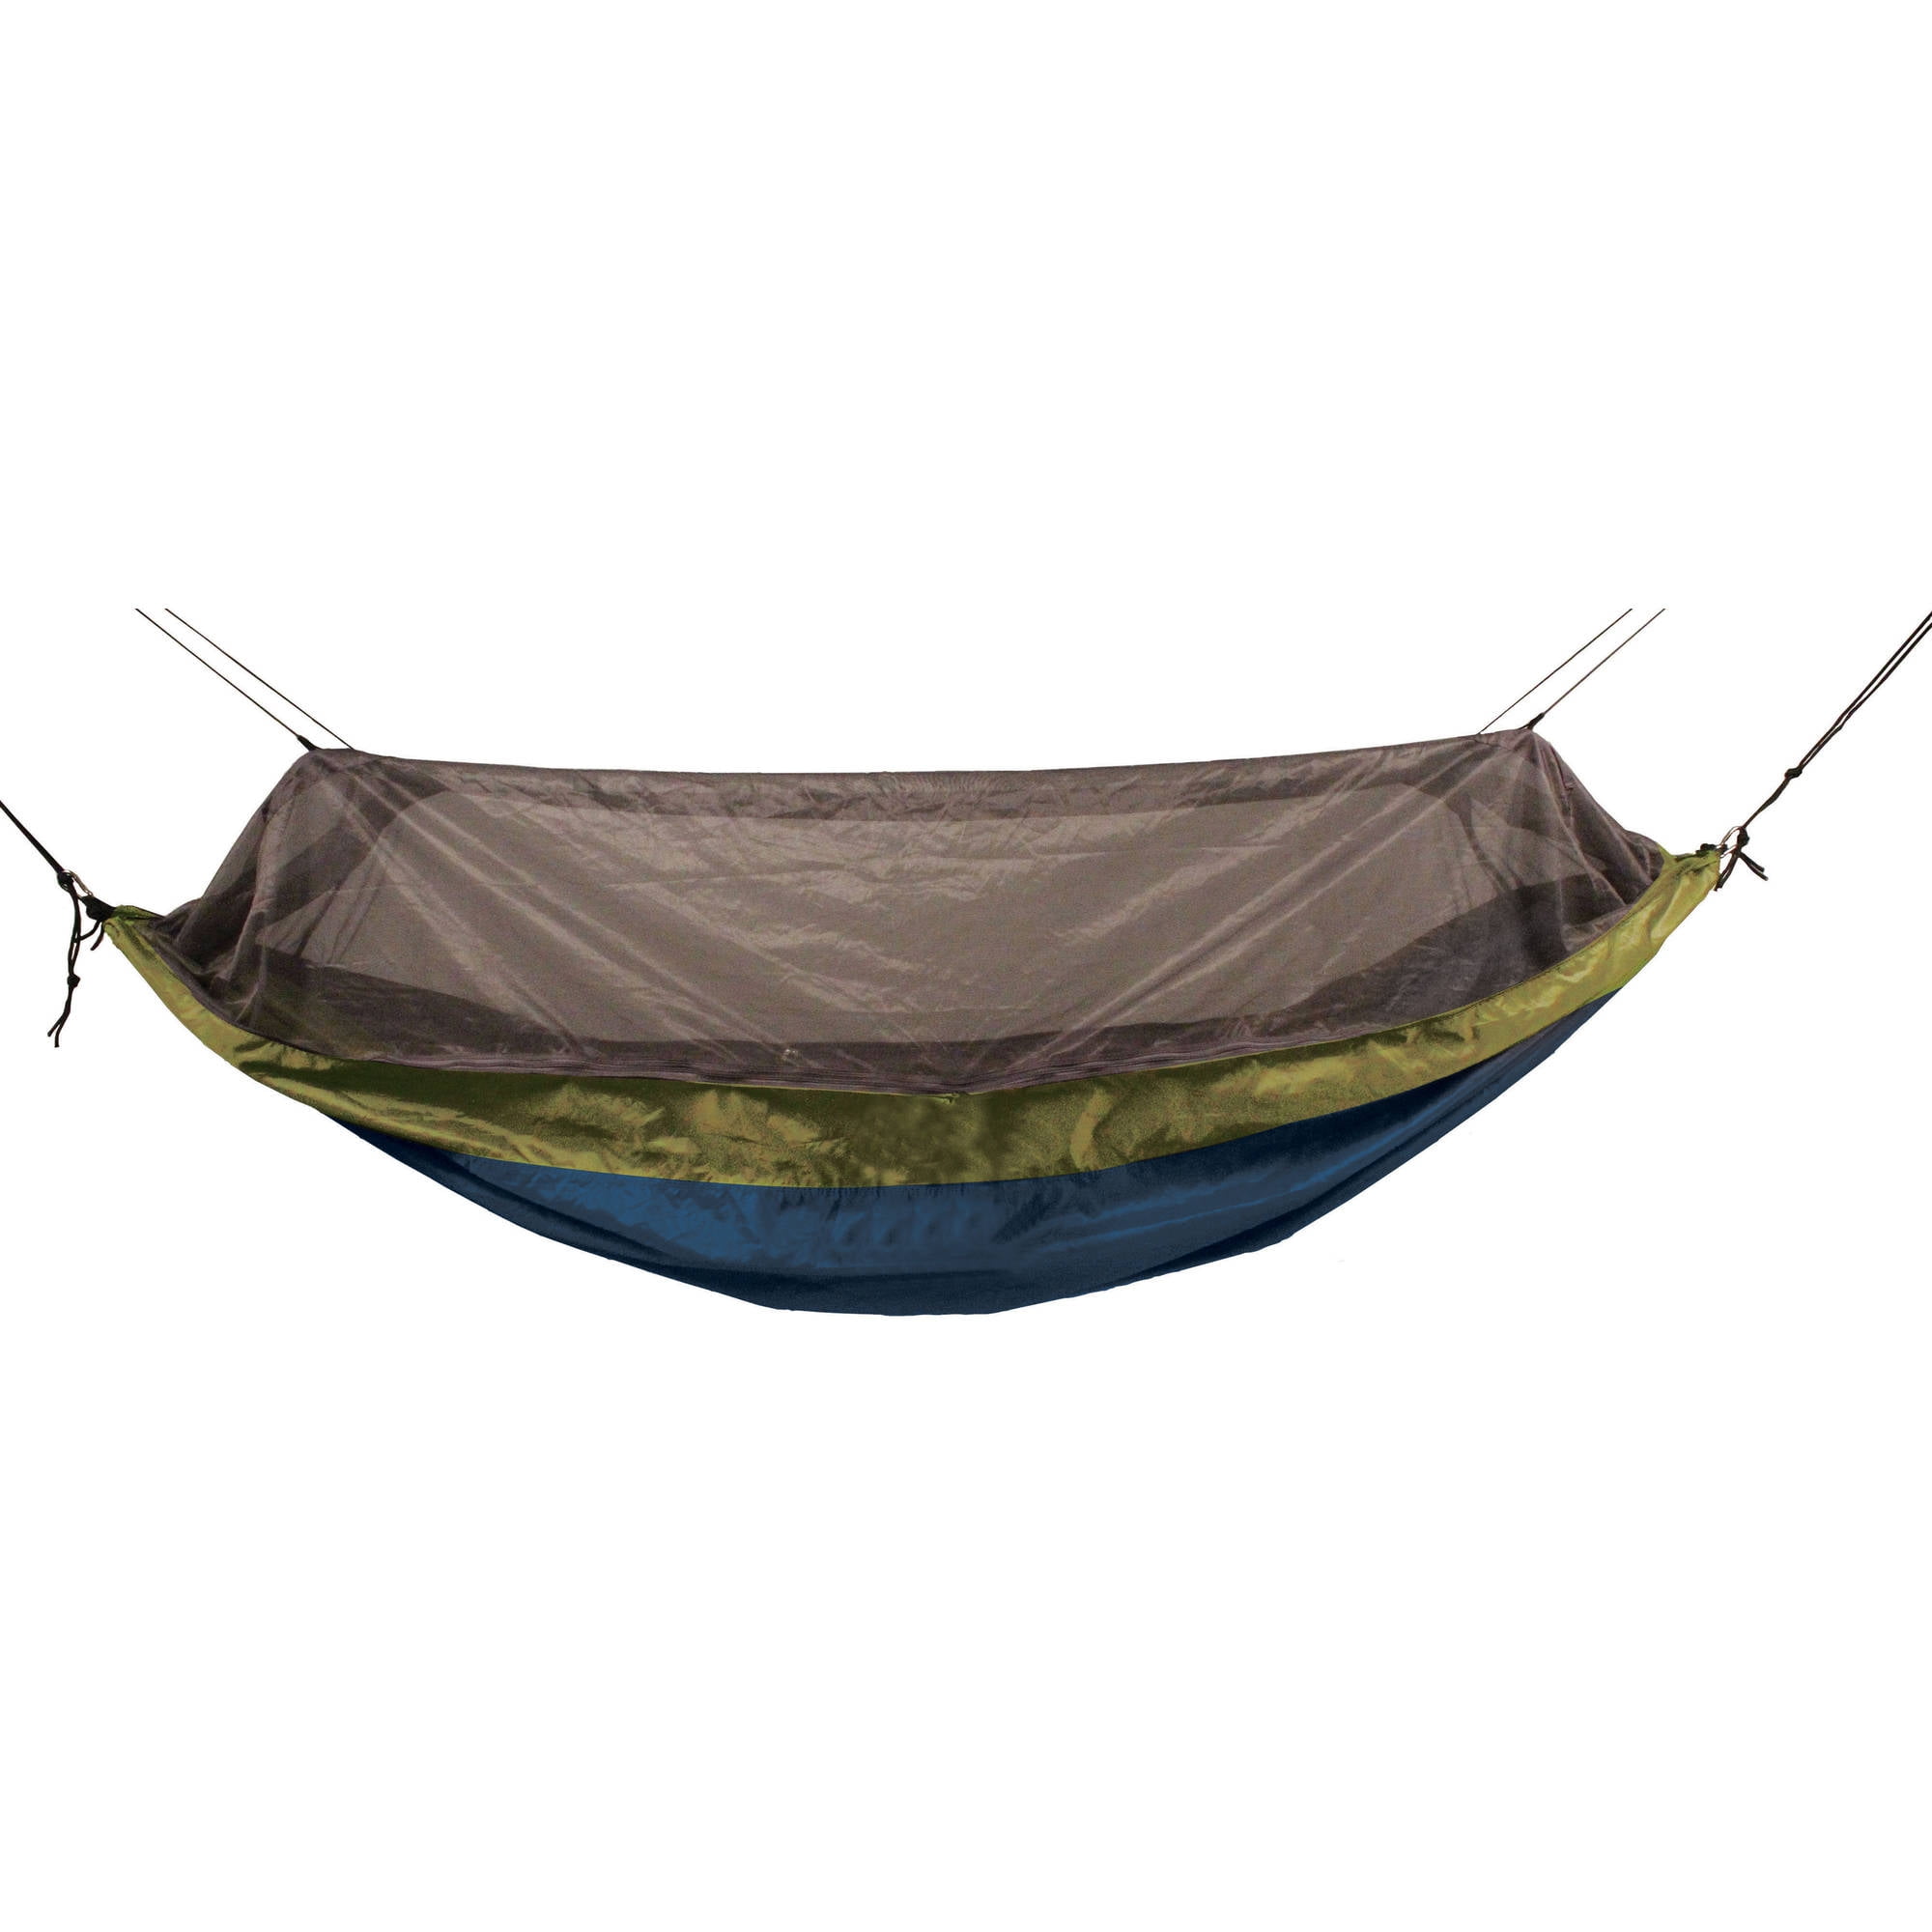 Larry Belmont Mammoet Dij Equip Nylon Mosquito Hammock with Attached Bug Net, 1 Person Red and Taupe,  Open Size 115" L x 59" W - Walmart.com